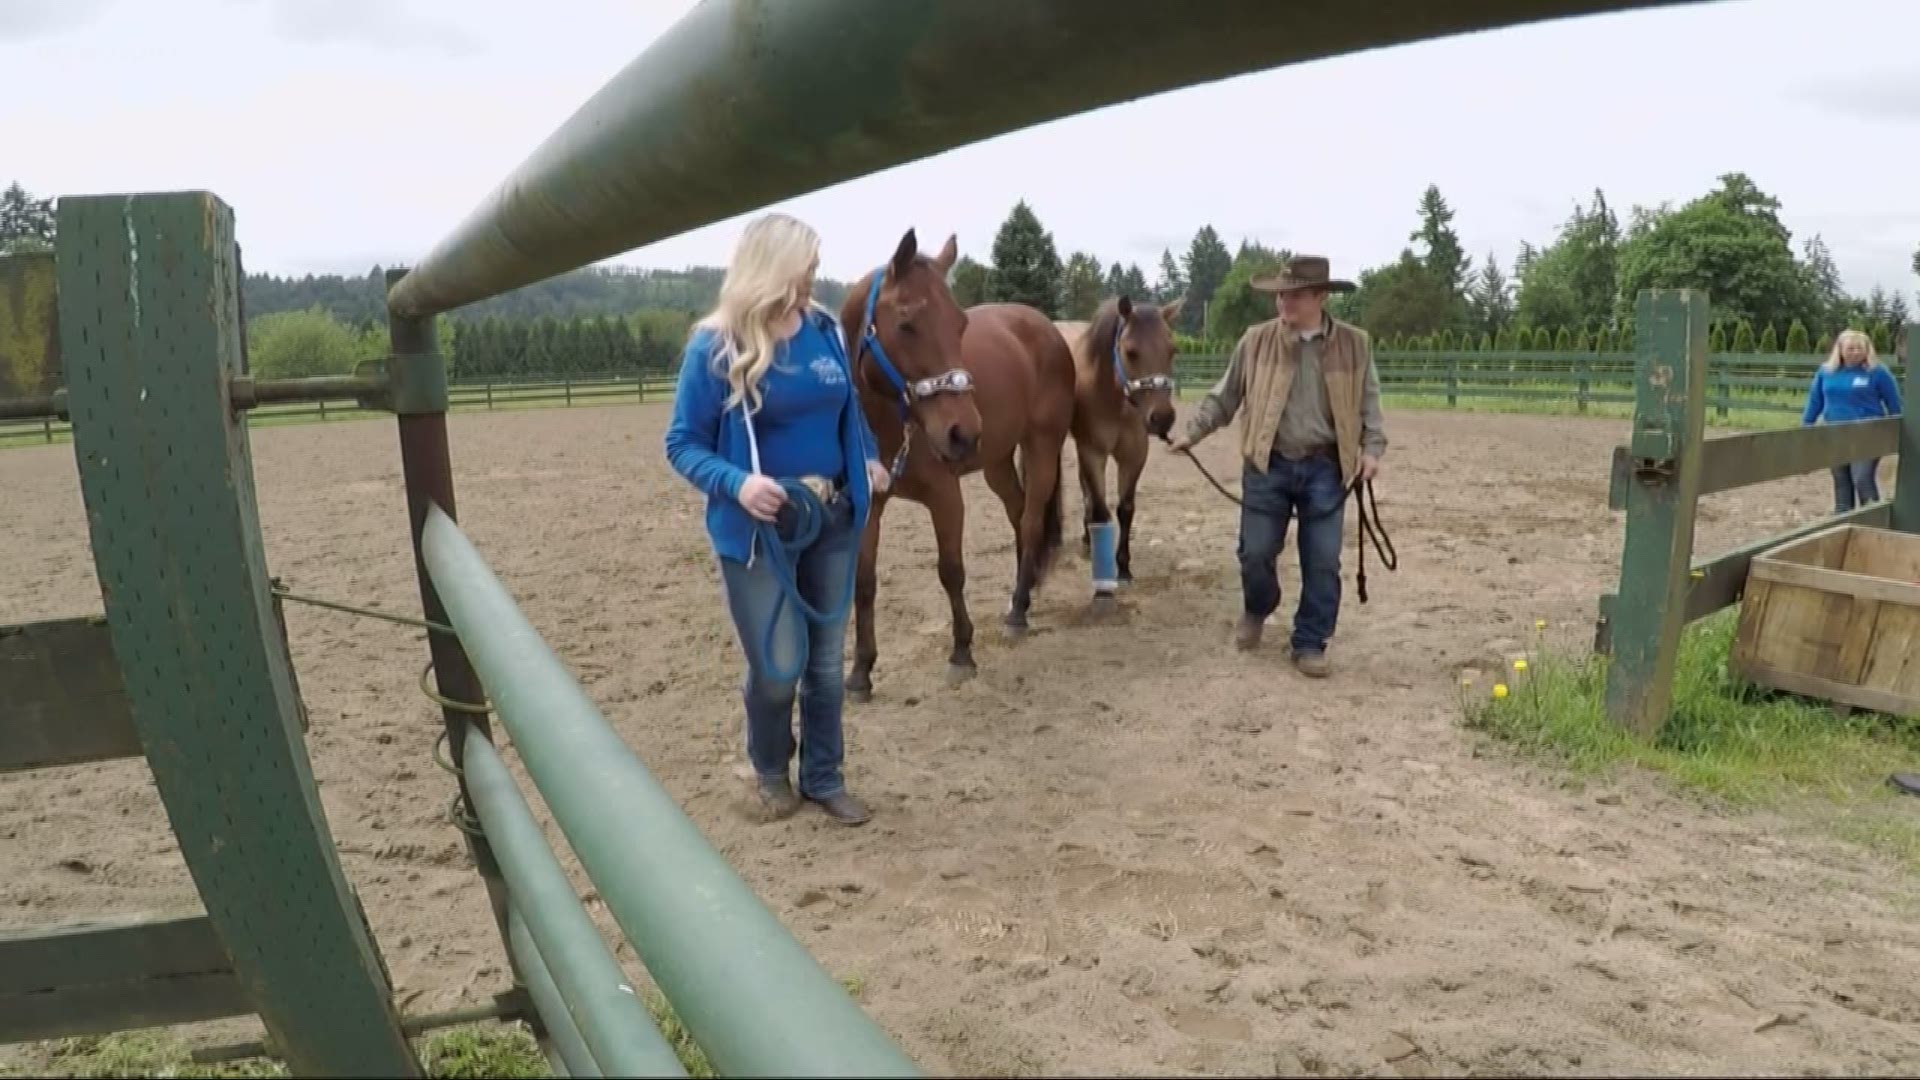 Horses injured in I-5, owner asking public for help with mounting vet bills